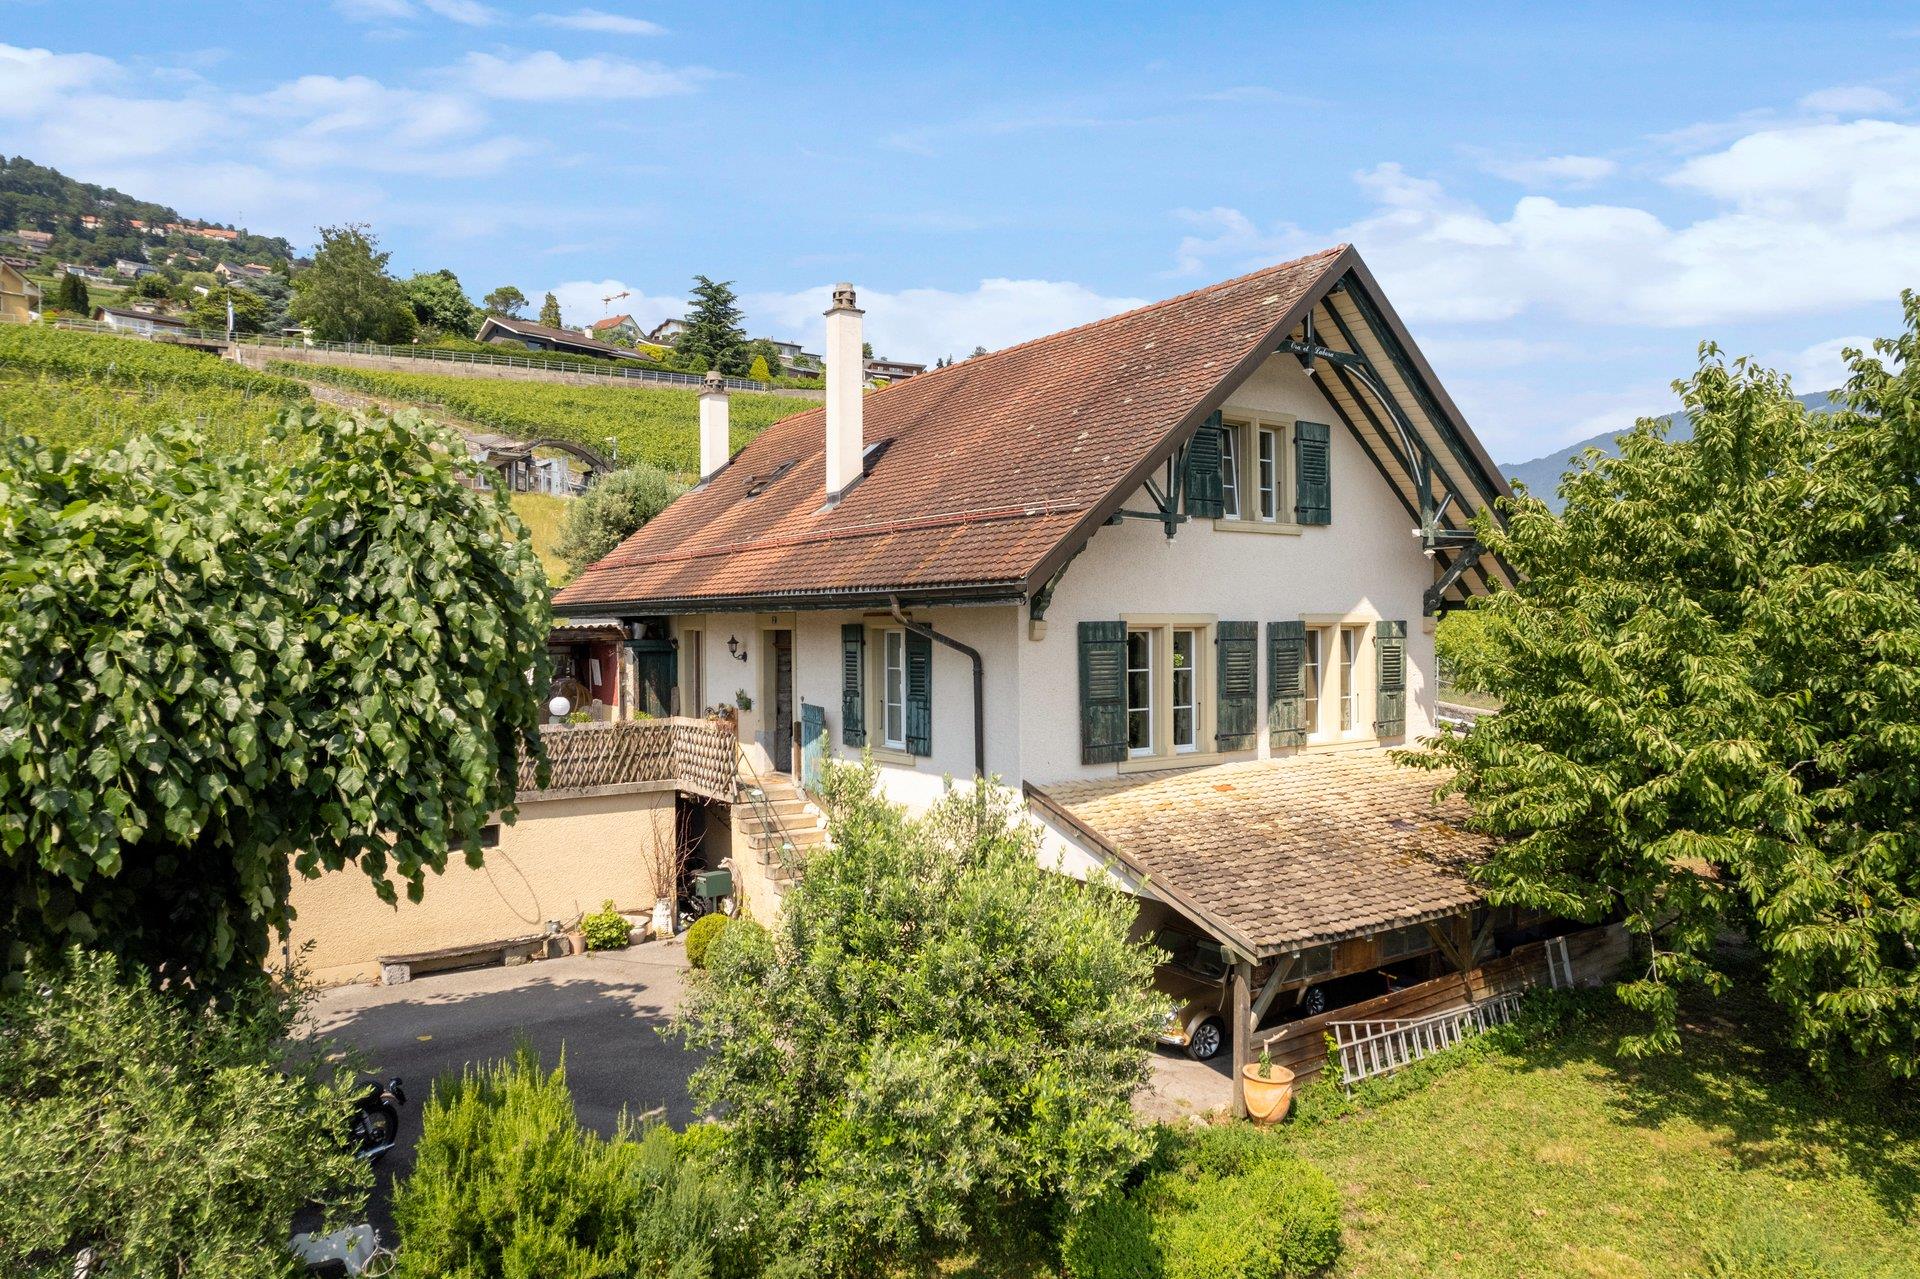 Magnificent 7.5-room winegrower's house with character - superb view of the lake